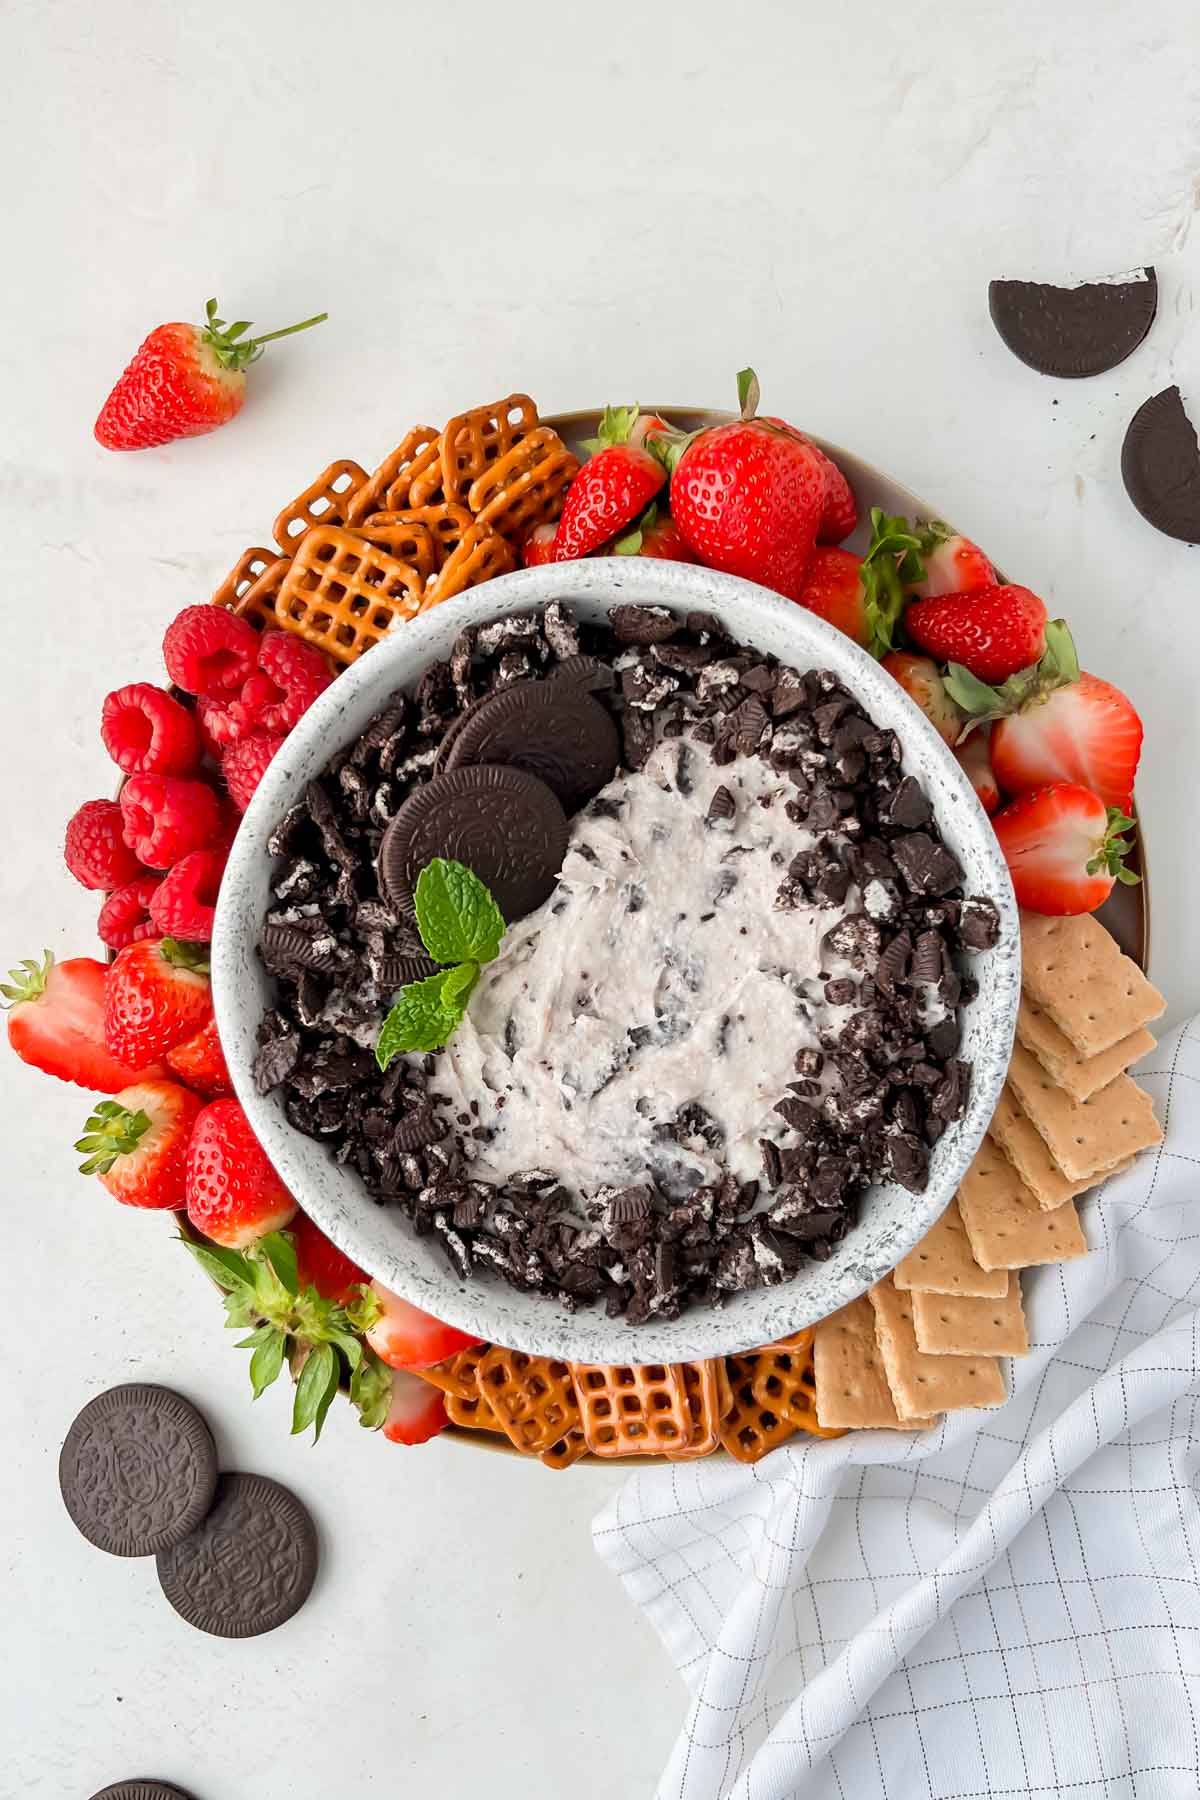 oreo dip in white serving bowl on plate with strawberries, raspberries, pretzels, and graham crackers.